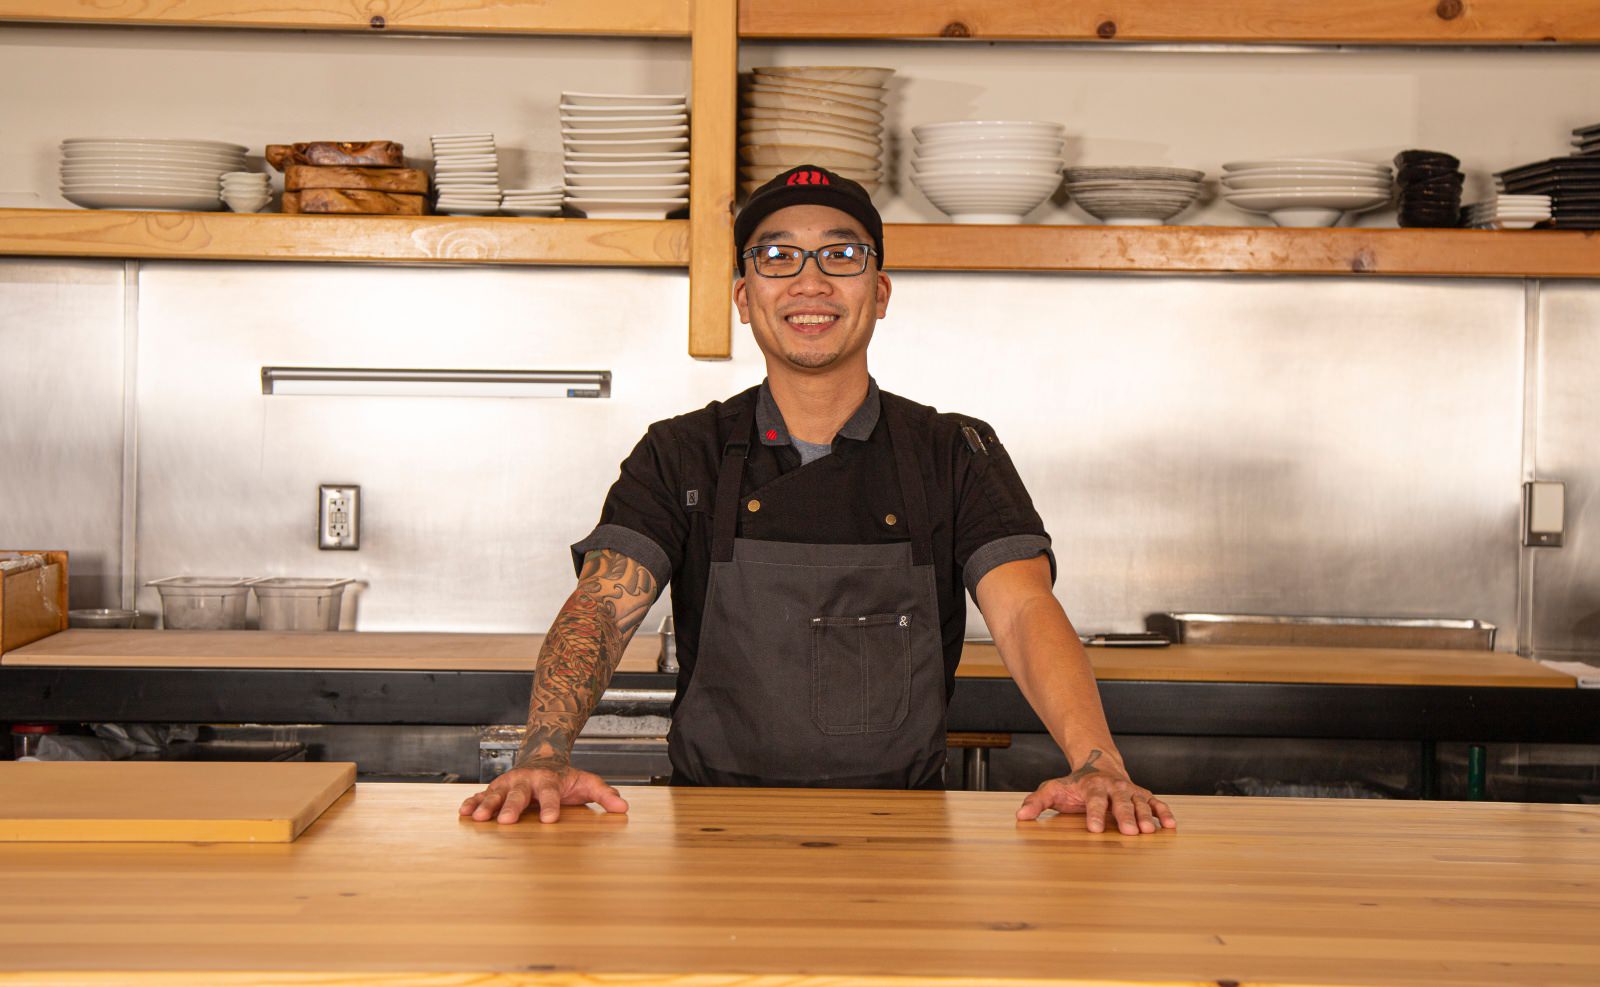 Billy Ngo, Chef, Founder, and Partner of Kru, Fish Face, and Kodaiko Restaurants